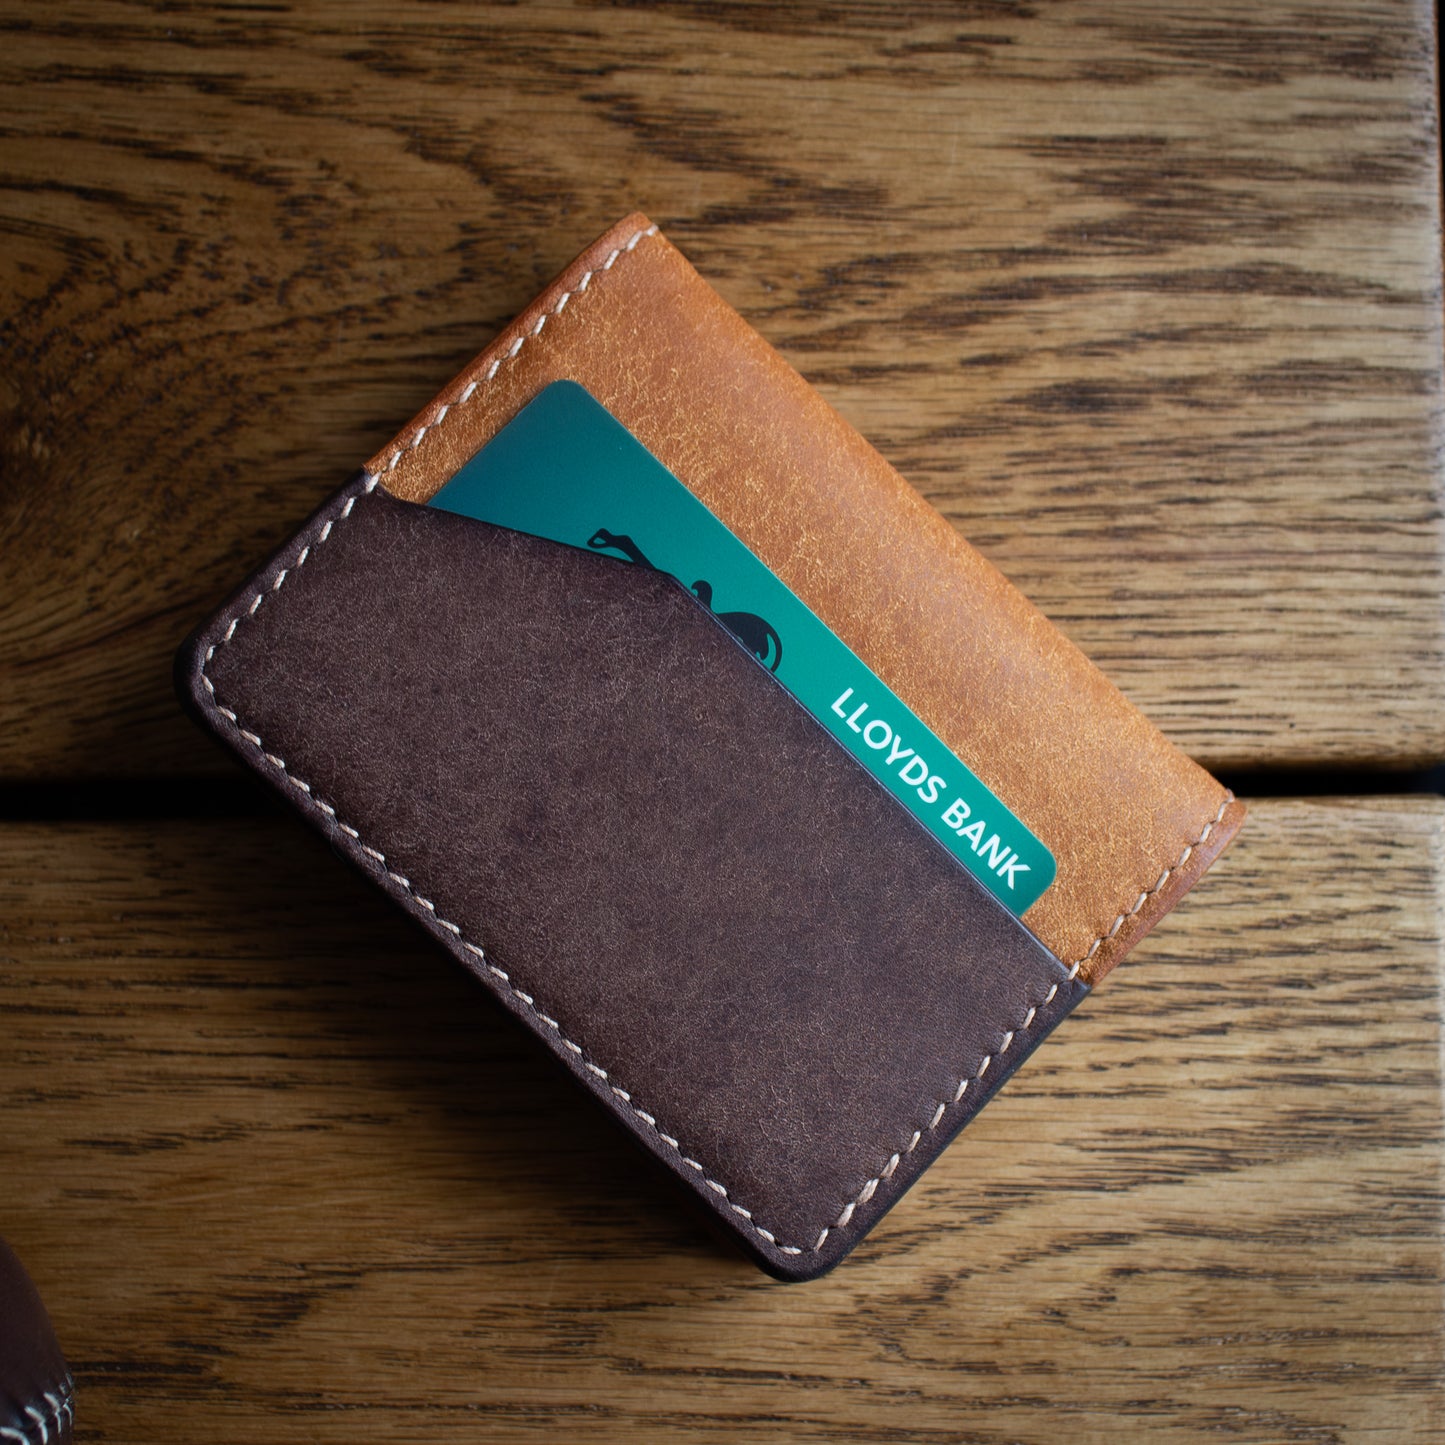 handmade leather wallet "the Cedar" ontop of wooden table. Made from Italian Pueblo leather Costagno & Cognac colors